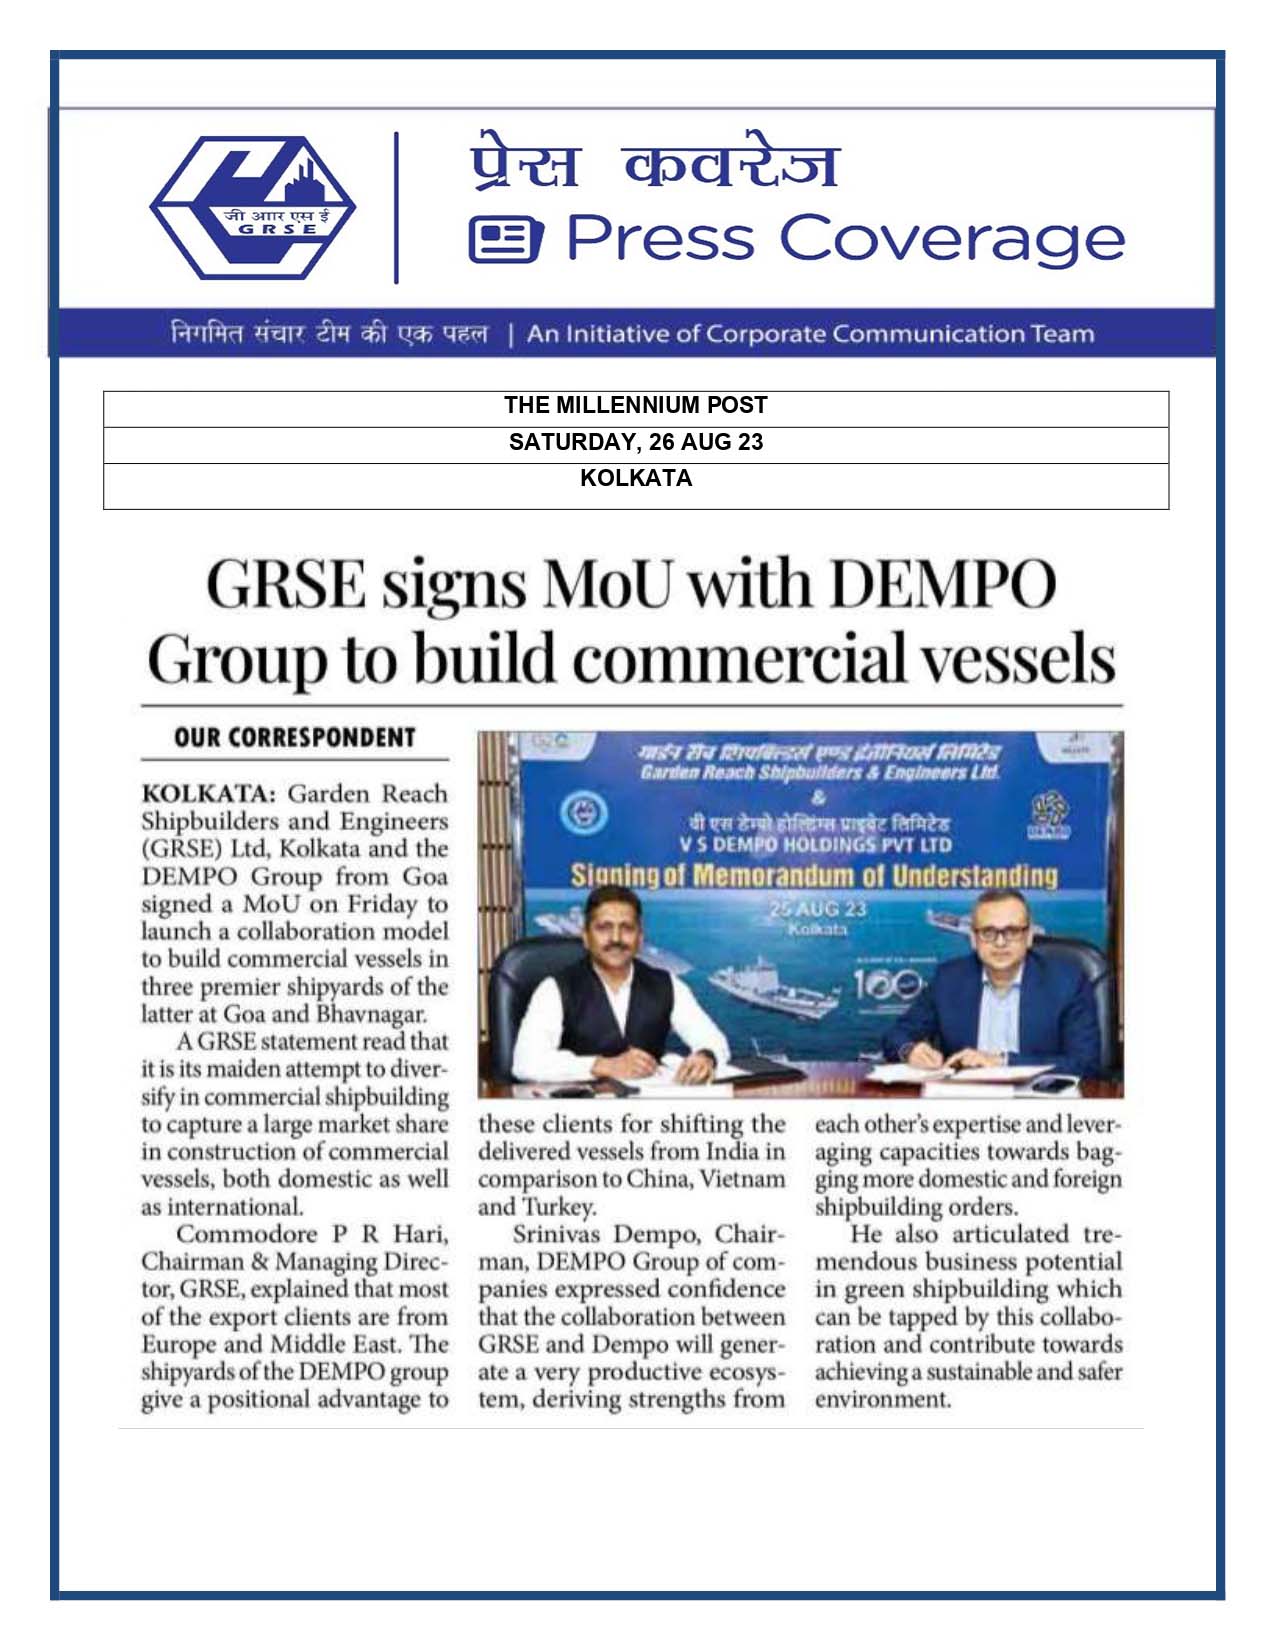 Press Coverage : The Millenium Post, 26 Aug 23 : GRSE signs MoU with Dempo to build commercial vessel on west coast